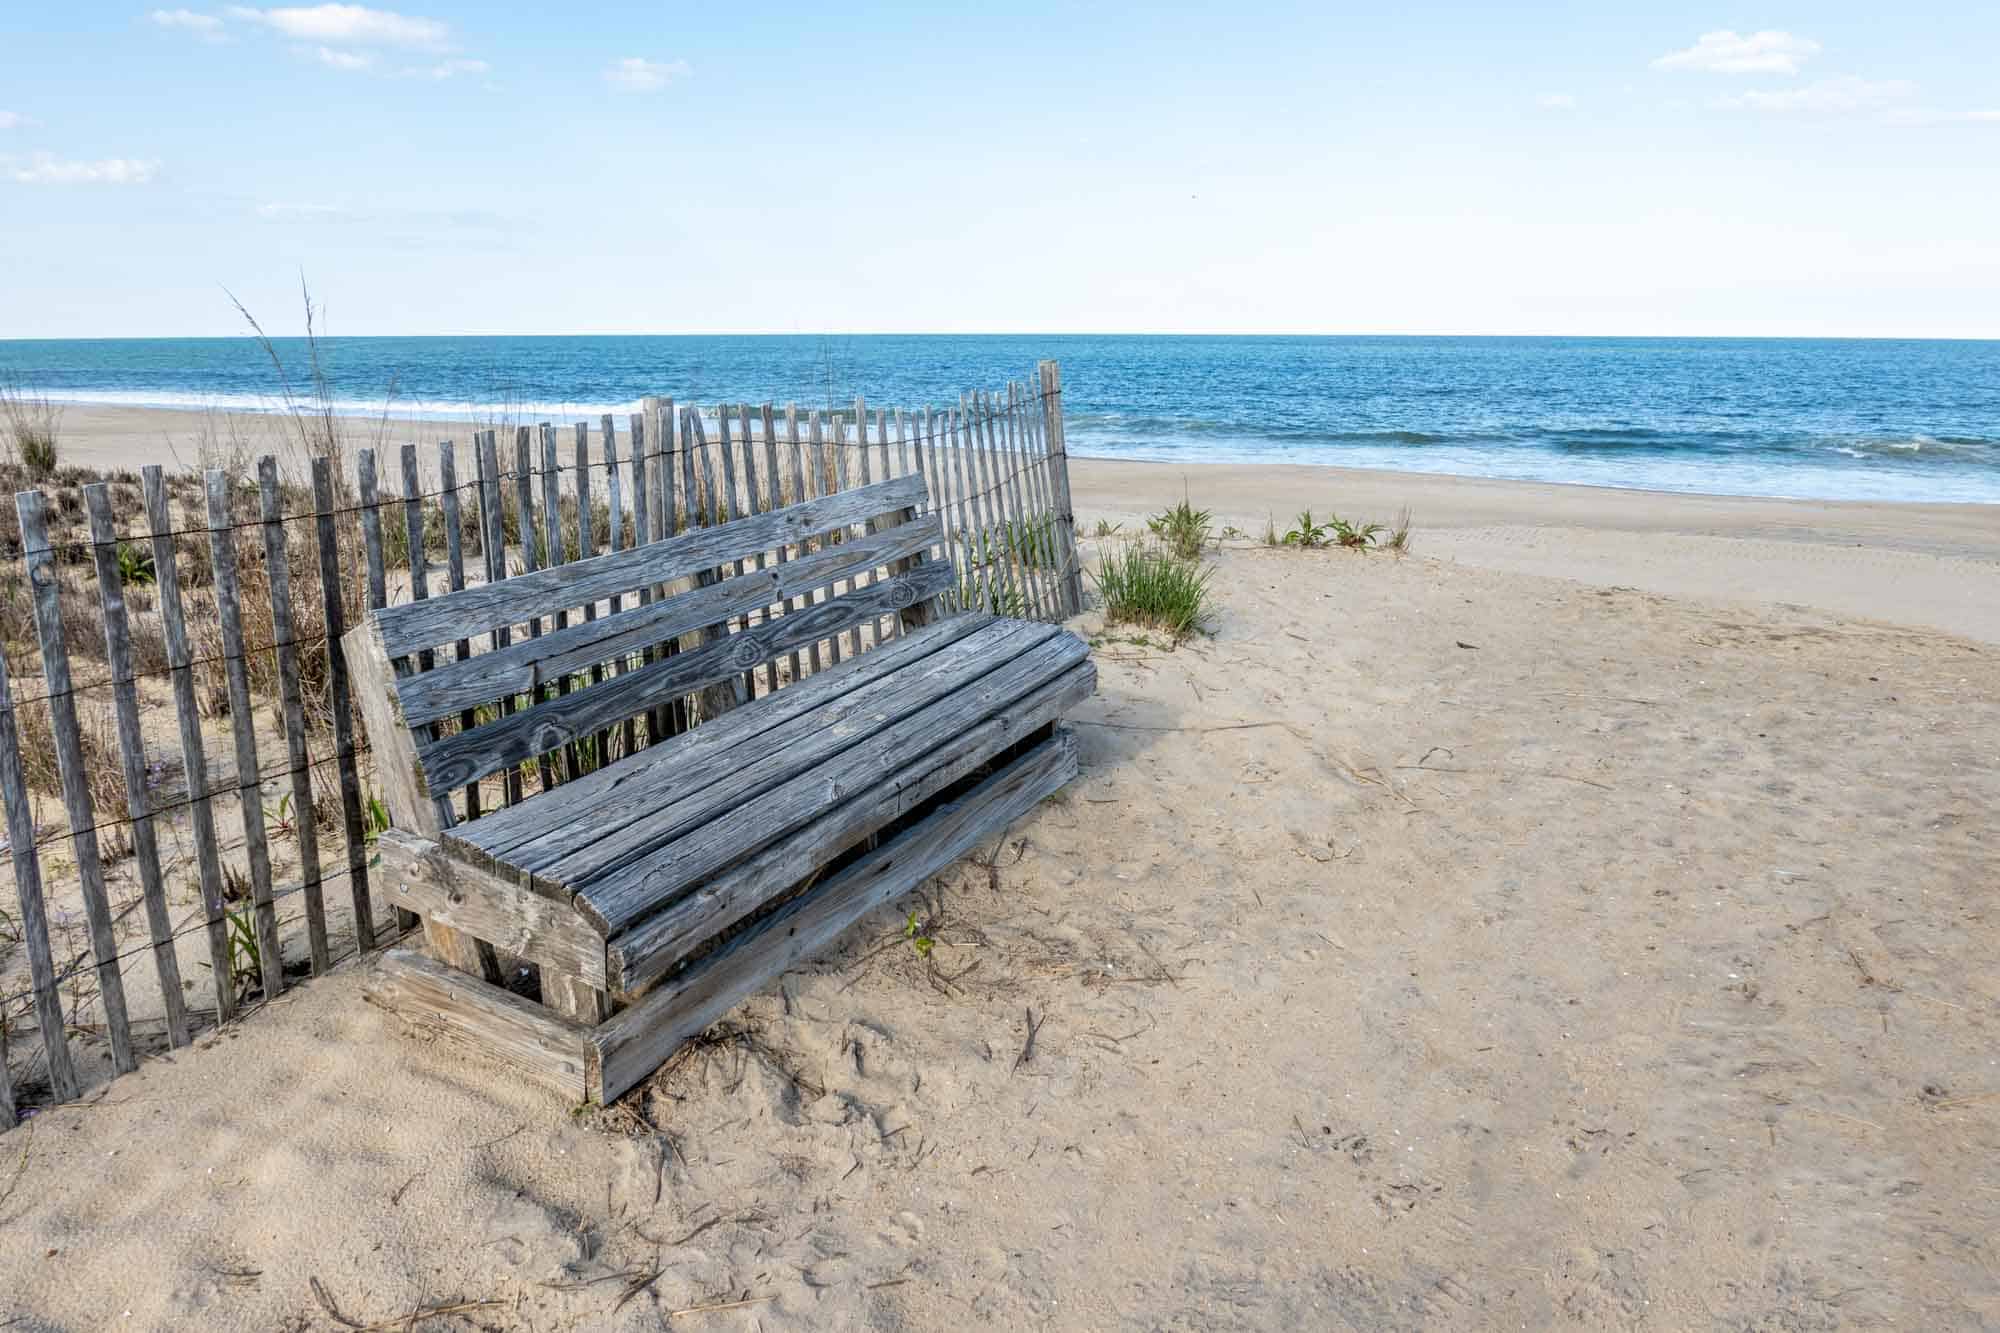 Wooden bench beside a fence protecting sea grass on a beach